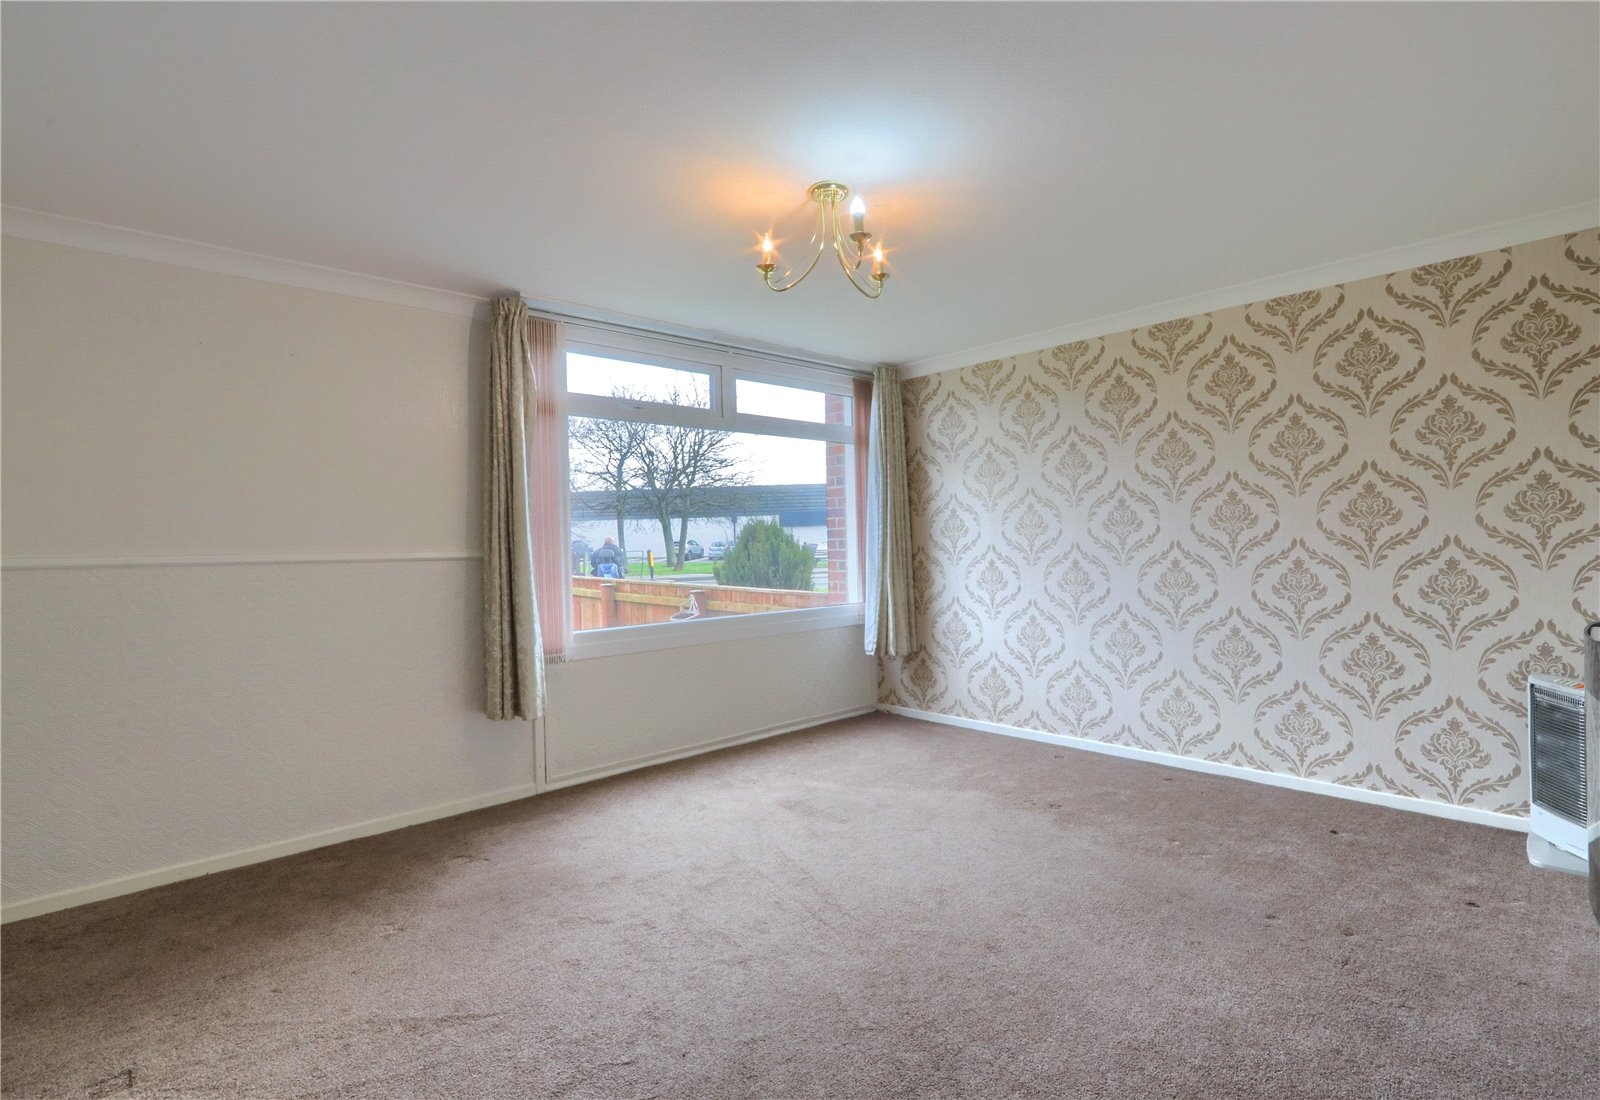 3 bed house for sale in West Dyke Road, Redcar  - Property Image 2